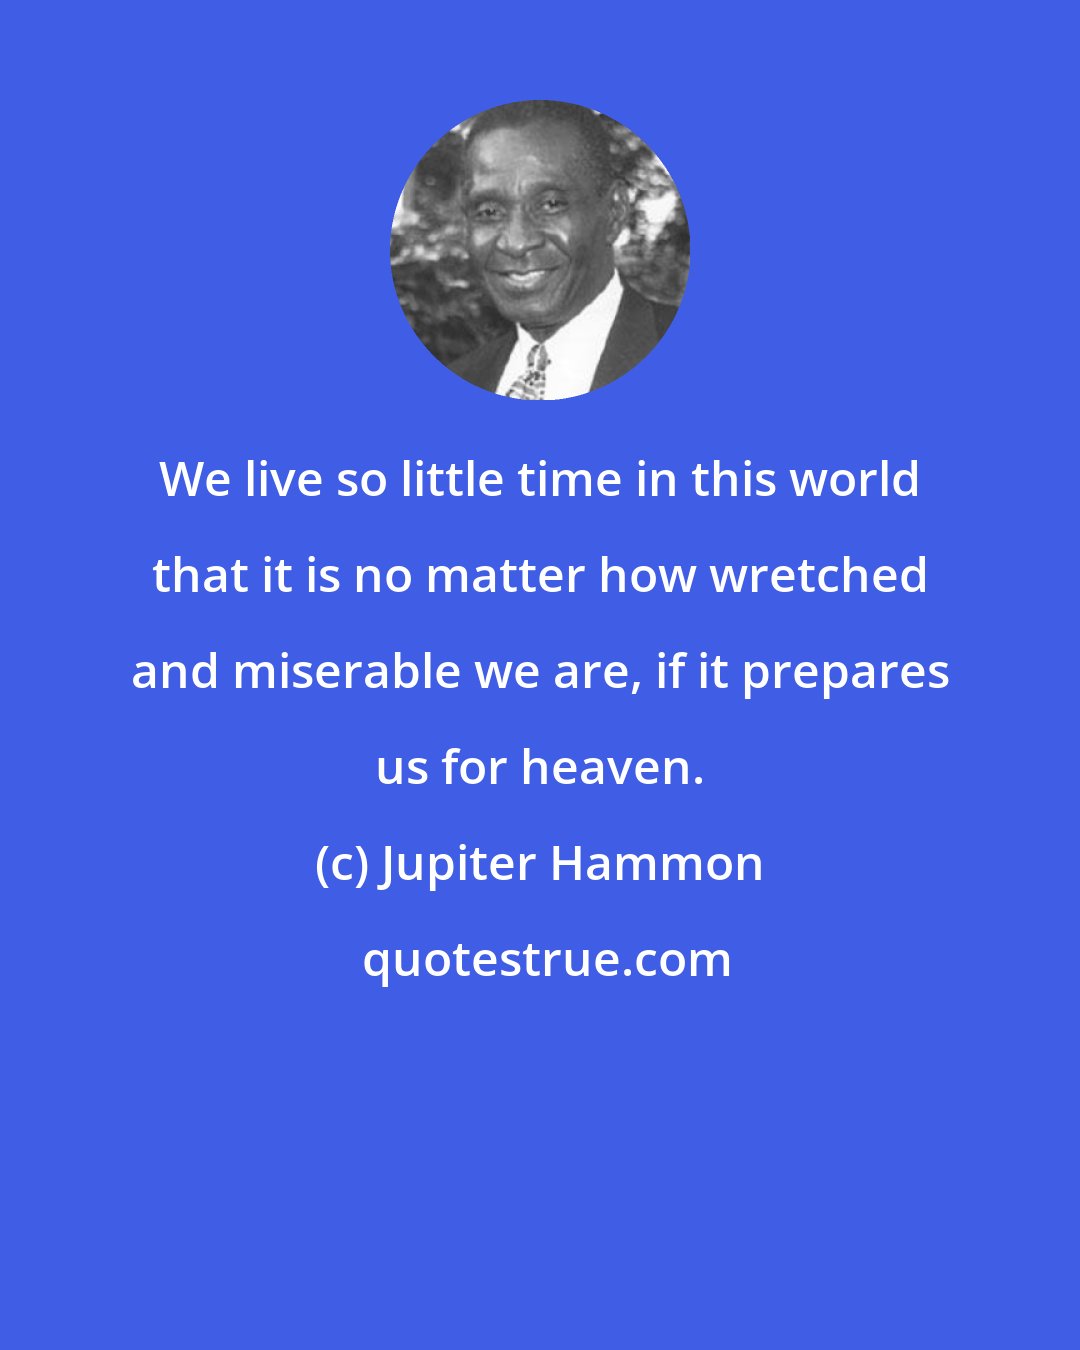 Jupiter Hammon: We live so little time in this world that it is no matter how wretched and miserable we are, if it prepares us for heaven.